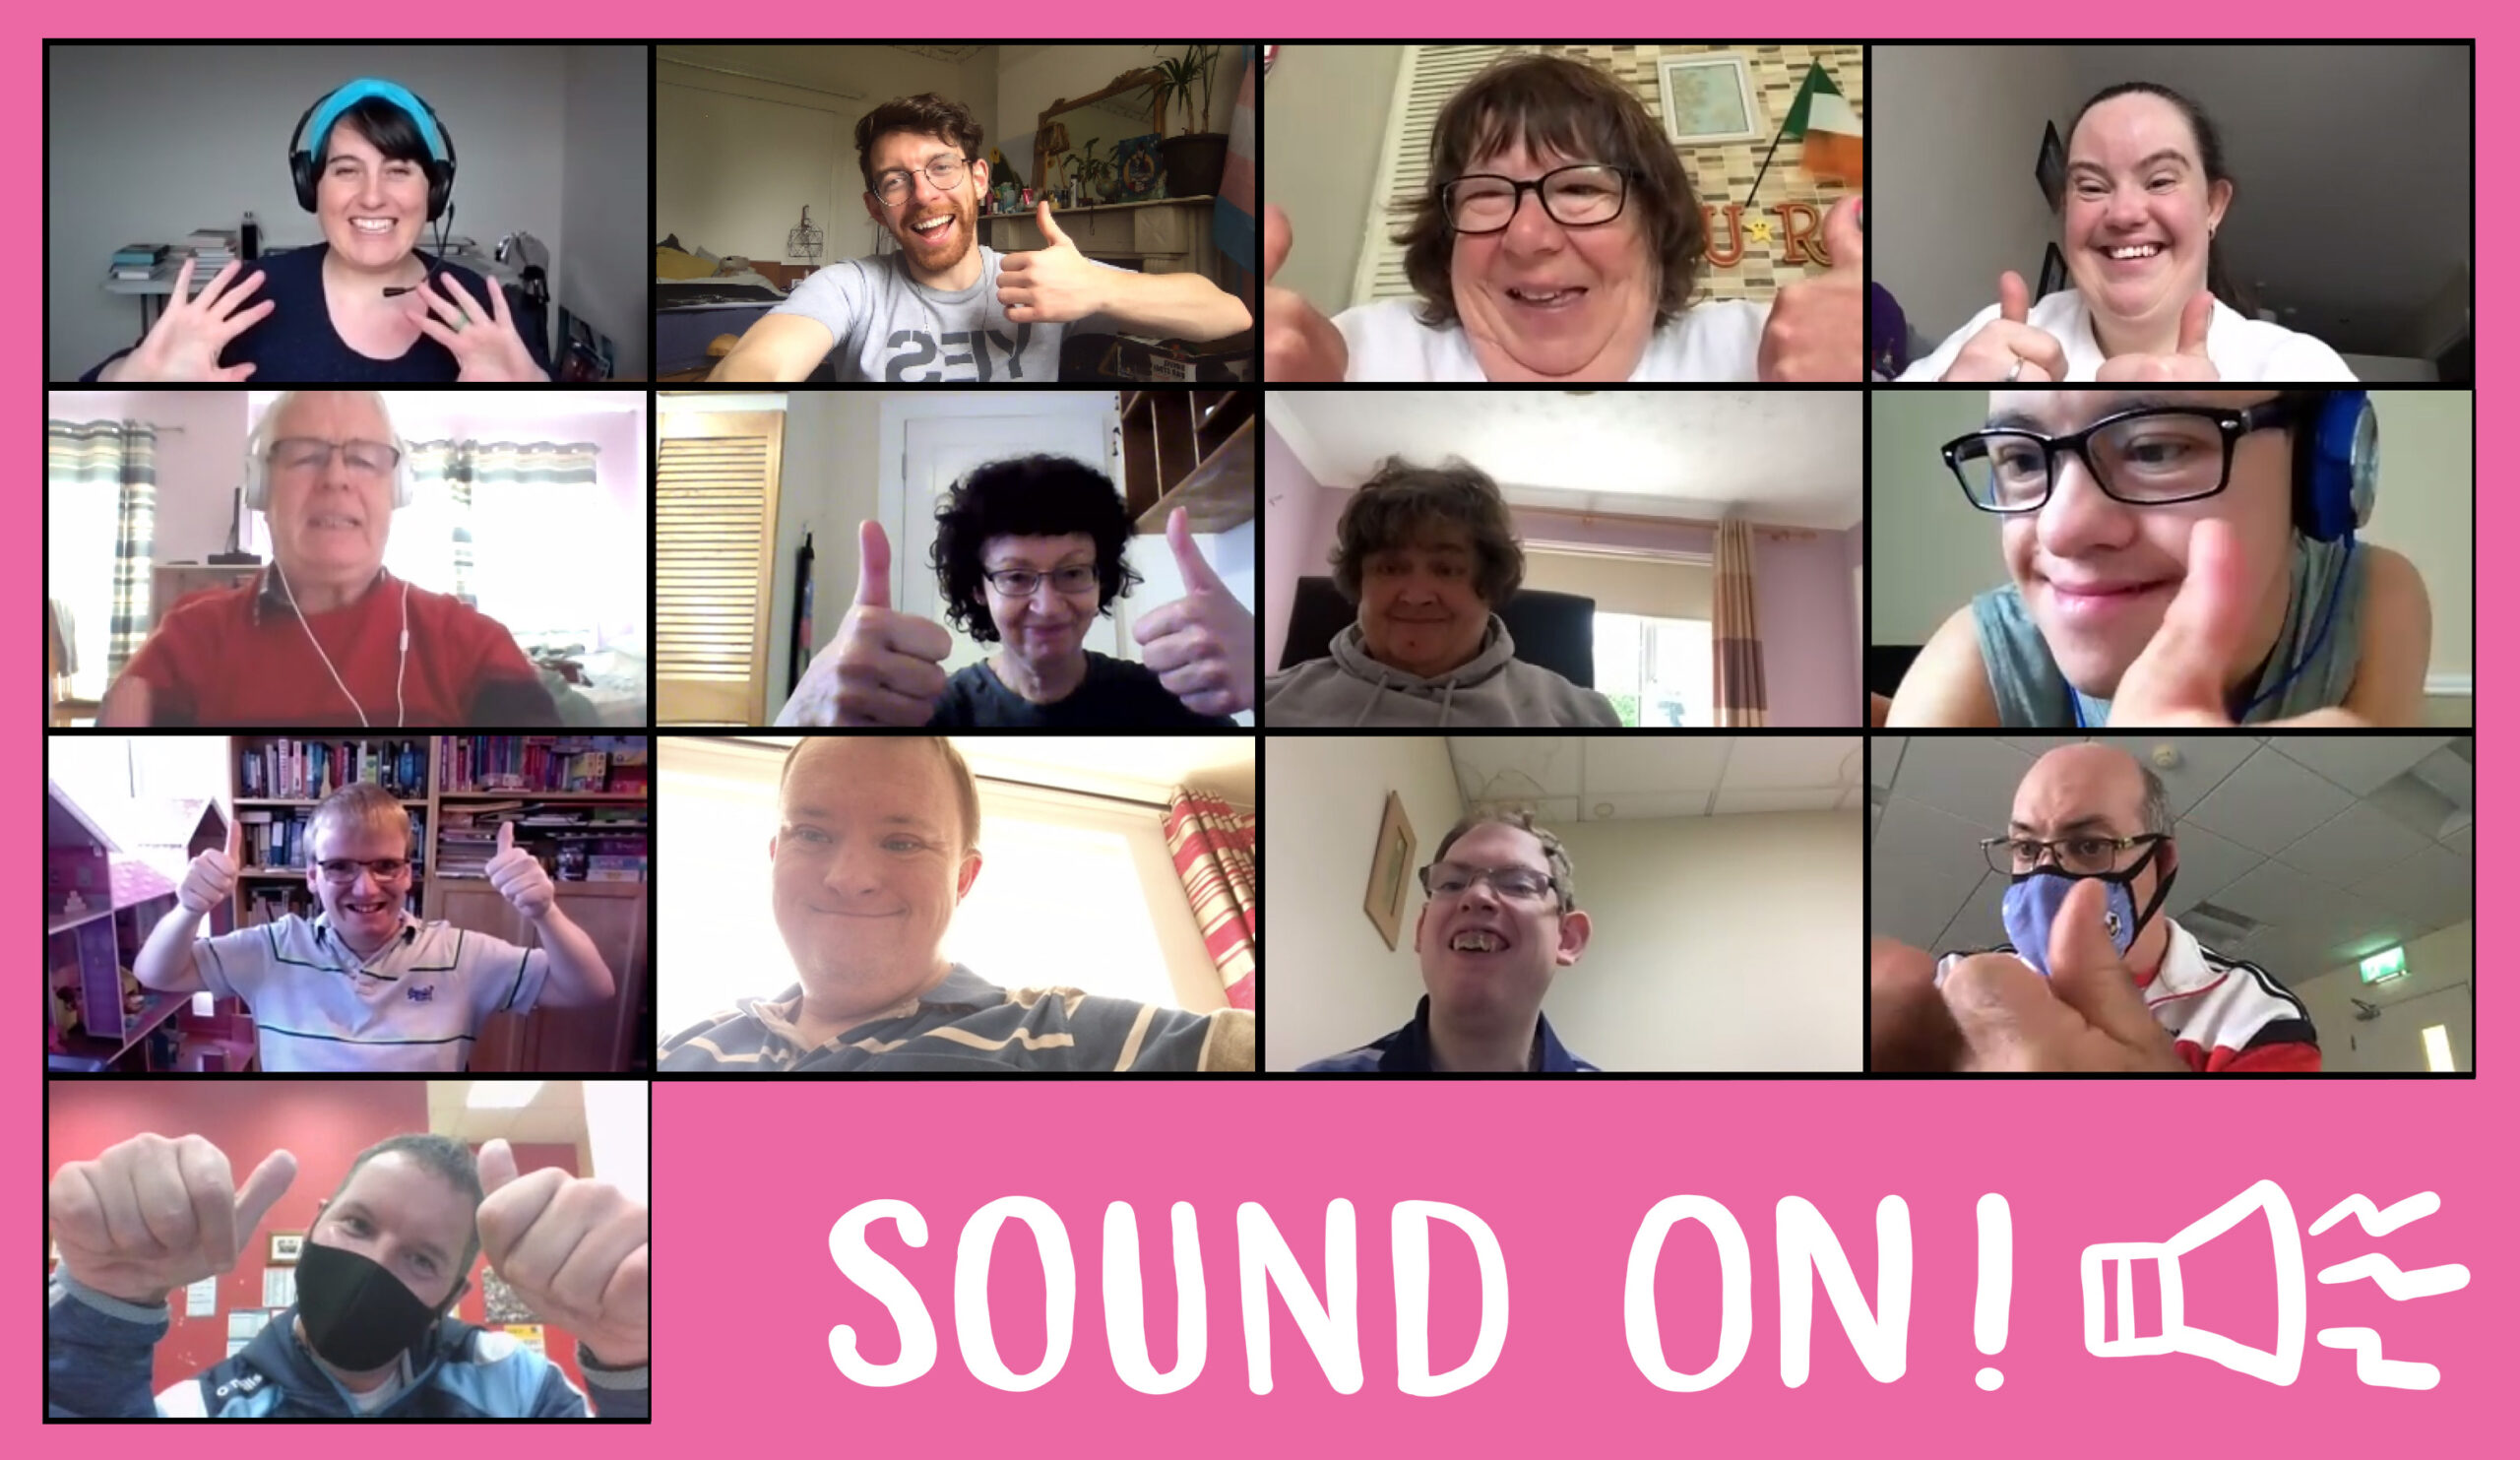 A large Zoom photograph of all the Sound On! Artists who worked together on the project on a bright pink background. There are 13 people in the zoom photograph each in an individual rectangular box in a grid of 4x4x4x1. In the bottom right hand corner of the image and grid are the words “Sound On!” and a audio-speaker icon in white. In the top left hand corner of the zoom photograph is a white woman in her thirties wearing a bright blue hairband. She has black hair with a fringe. She is smiling. She is wearing black headphones with attached microphone and a navy dress. She is waving with both her hands. She is sitting down in a room with white walls. There is a table with books on it in the background. To the right is a photograph of a white man in his thirties. He has brown hair and a bead. He is wearing glasses, a grey t-shirt with YES printed on the front. He is wearing black headphones. He is holding his left arm and hand in a thumbs up pose. He is sitting down in a room with cream coloured walls, and there is white marbled fireplace with a large mirror on it and plant behind him. To the right of this is a photograph of a white woman in her fifties. She has short brown hair and is wearing black framed glasses. She is smiling, and has both arms and hands in a thumbs up pose. Behind her there is small Irish flag and a undistinguishable picture hanging on the wall. To the right of this is a photograph of a woman in her thirties. She has brown hair and is smiling. She has her hands in a thumbs up pose. She is sitting down in a white walled room. There are undistinguishable pictures on the wall in the background. Underneath this photograph, is a photograph of a white man in his twenties. He is wearing silver and blue headphones, and black framed glasses. He is wearing a teal green vest top and has his left hand in a thumbs up pose close to the camera. To the left of this photograph, is a photograph of a white woman in her fifties. She has short brown hair, and is wearing a grey hoody. She is sitting down and smiling. She is in a pink walled room, and there is a window in the background. To the left of this photograph is a photograph of a white woman in her forties. She has short black curly hair. She has both her hands in a thumbs up pose, and is sitting in a white walled room. There is a brown shelf above her head. To the left of this photograph is a photograph of a white man in his fifties. He has white hair and is wearing white headphones, a red jumper and he is smiling. He is sitting in a pink room and there are two windows in the background. Underneath this photograph is a photograph of a white man in his twenties. He has blonde hair. He is wearing black framed glasses, and a white and black stripped t-shirt. He is smiling, and has both his hands in a thumbs up pose. In the back ground there is a large shelving unit with lots of books on it, and there is a window to his left. To the right of this photograph is a man in his thirties. He is smiling, and is wearing a green and cream stripped t-shirt. There is a window in the background. To the right of this photograph is a white man in his thirties with short brown hair. He is wearing glasses and a Dublin football jersey. He is sitting down in cream coloured room. There is an undistinguishable picture hanging on the wall in the background. To the right of this picture is a white man in his forties. He has dark hair and is wearing glasses. He is wearing a blue facemask, and a white, red and black stripped t-shirt. He is sitting down and his left hand is in a thumbs up pose. Underneath this and the previous two other photographs are the words Sound On! with a speaker icon. To the left of these words there is a photograph of a white man in his thirties. He has dark hair. He is wearing a blue and navy Dublin football jersey, and a black facemask. He has both his hands in a thumbs up pose. He is sitting down, and the room has red walls. There are undistinguishable pictures on the wall in the background.